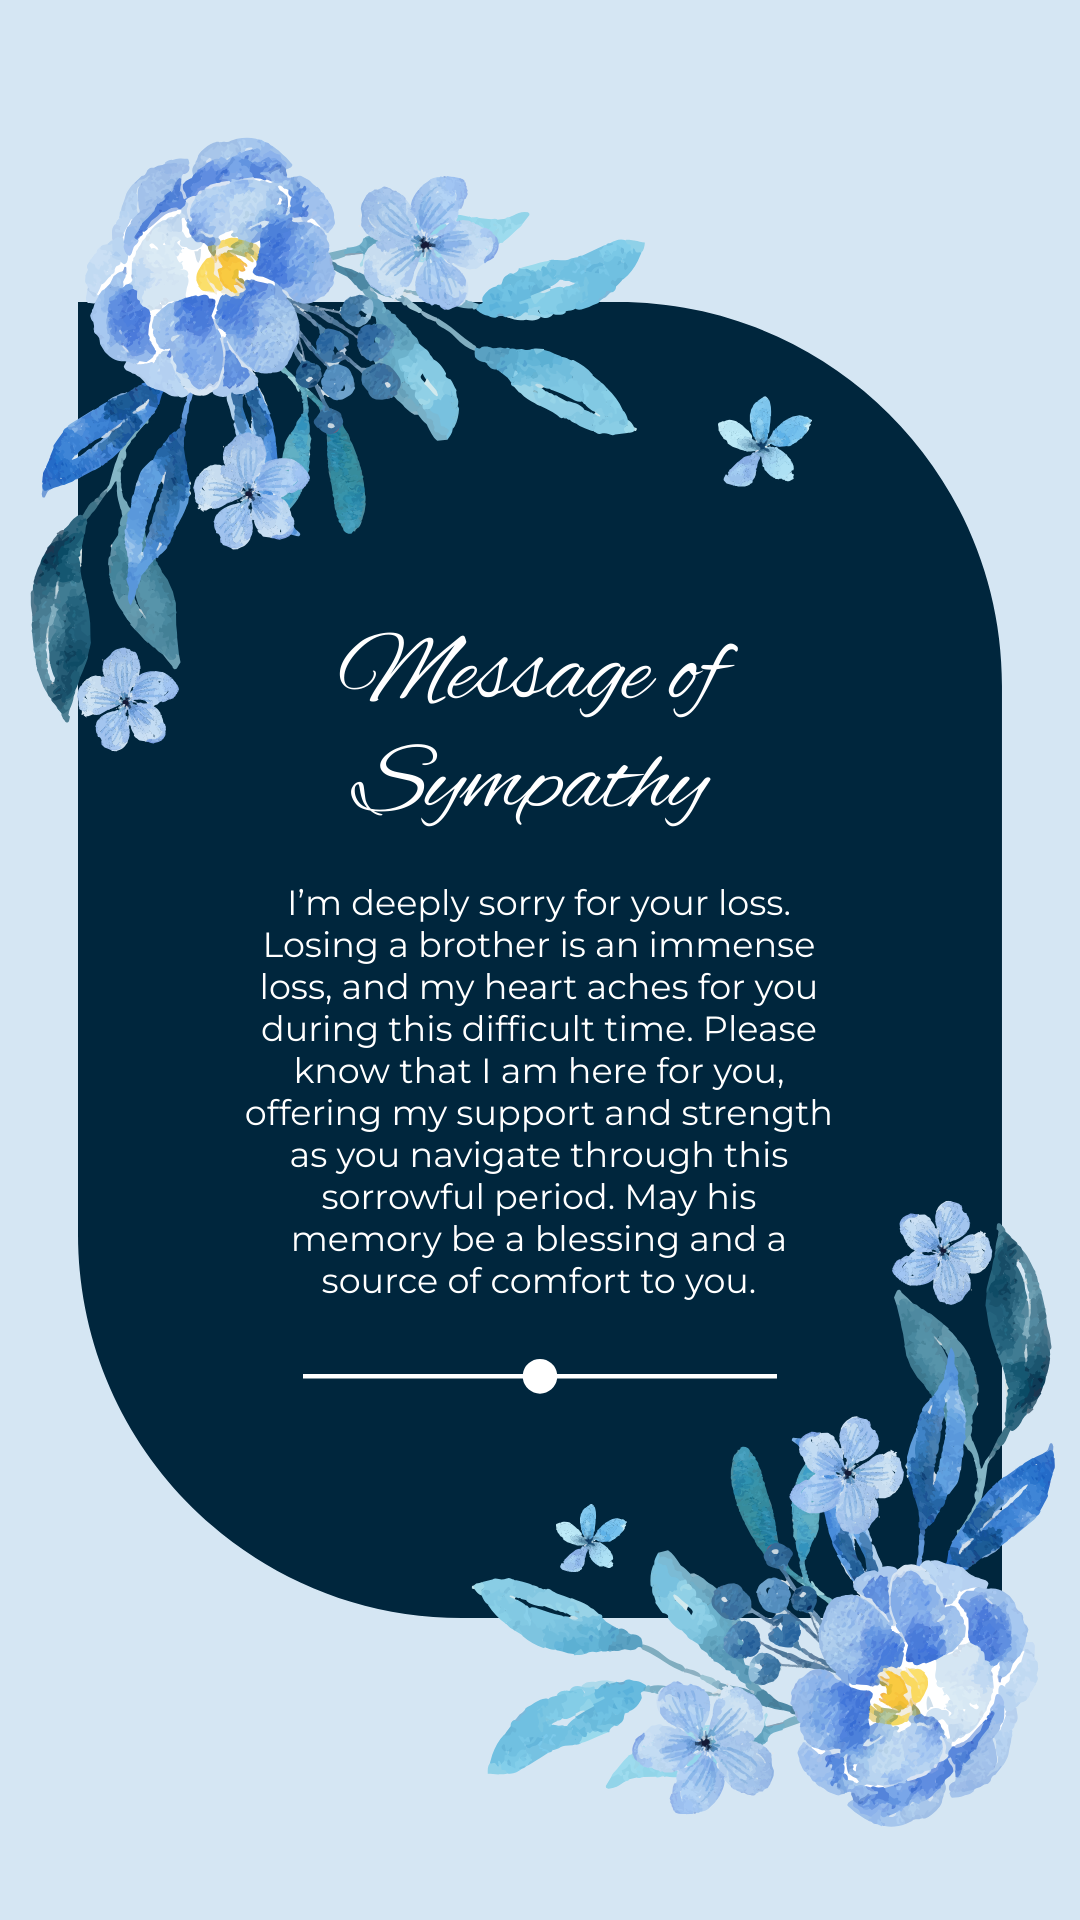 Sympathy message for loss of brother